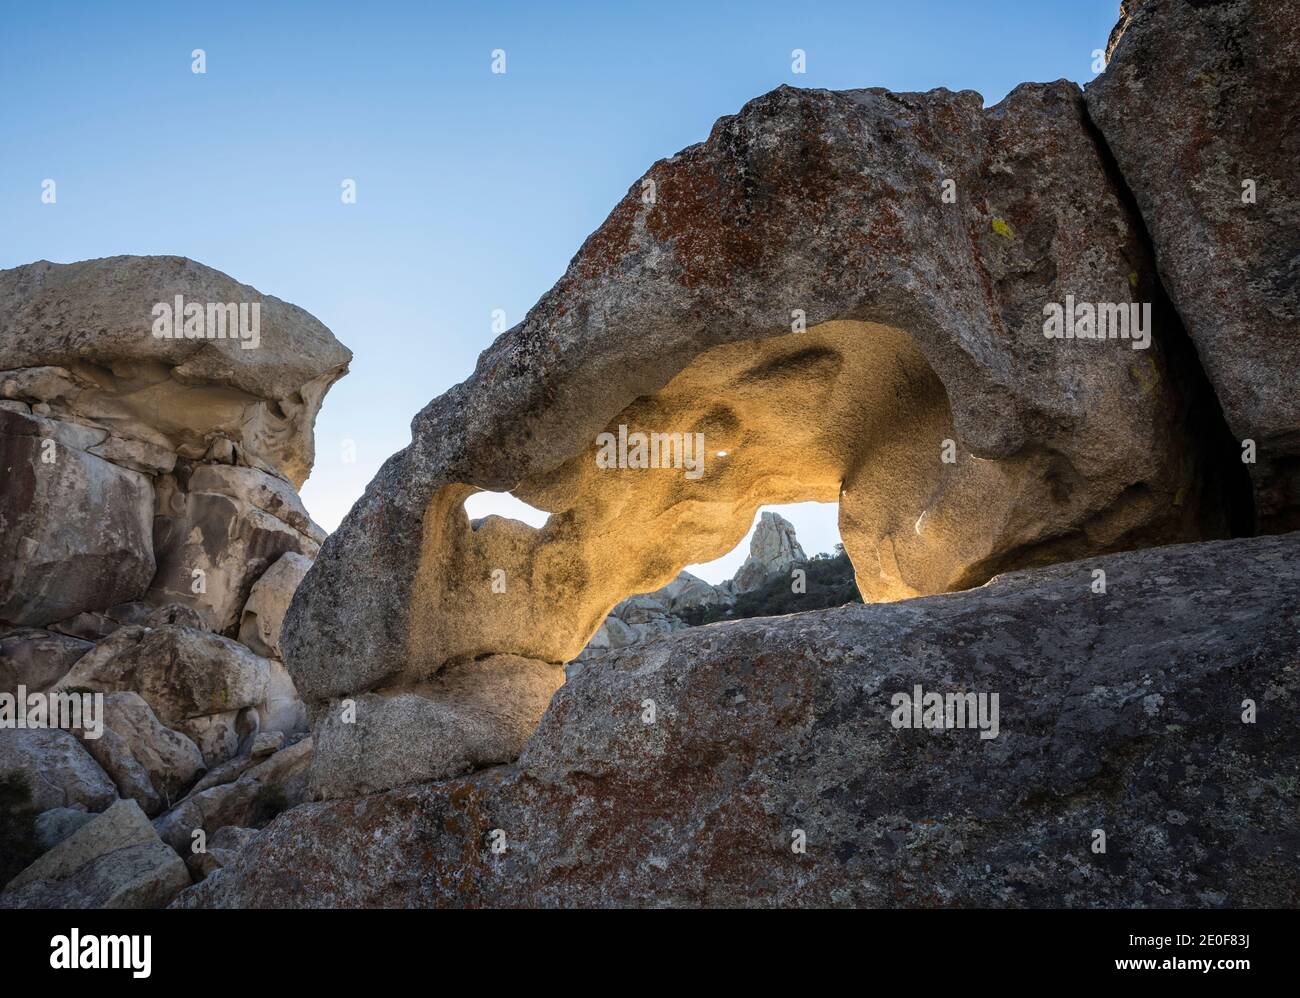 A natural rock archway and rock formations in City of Rocks National Reserve, Idaho, USA. Stock Photo